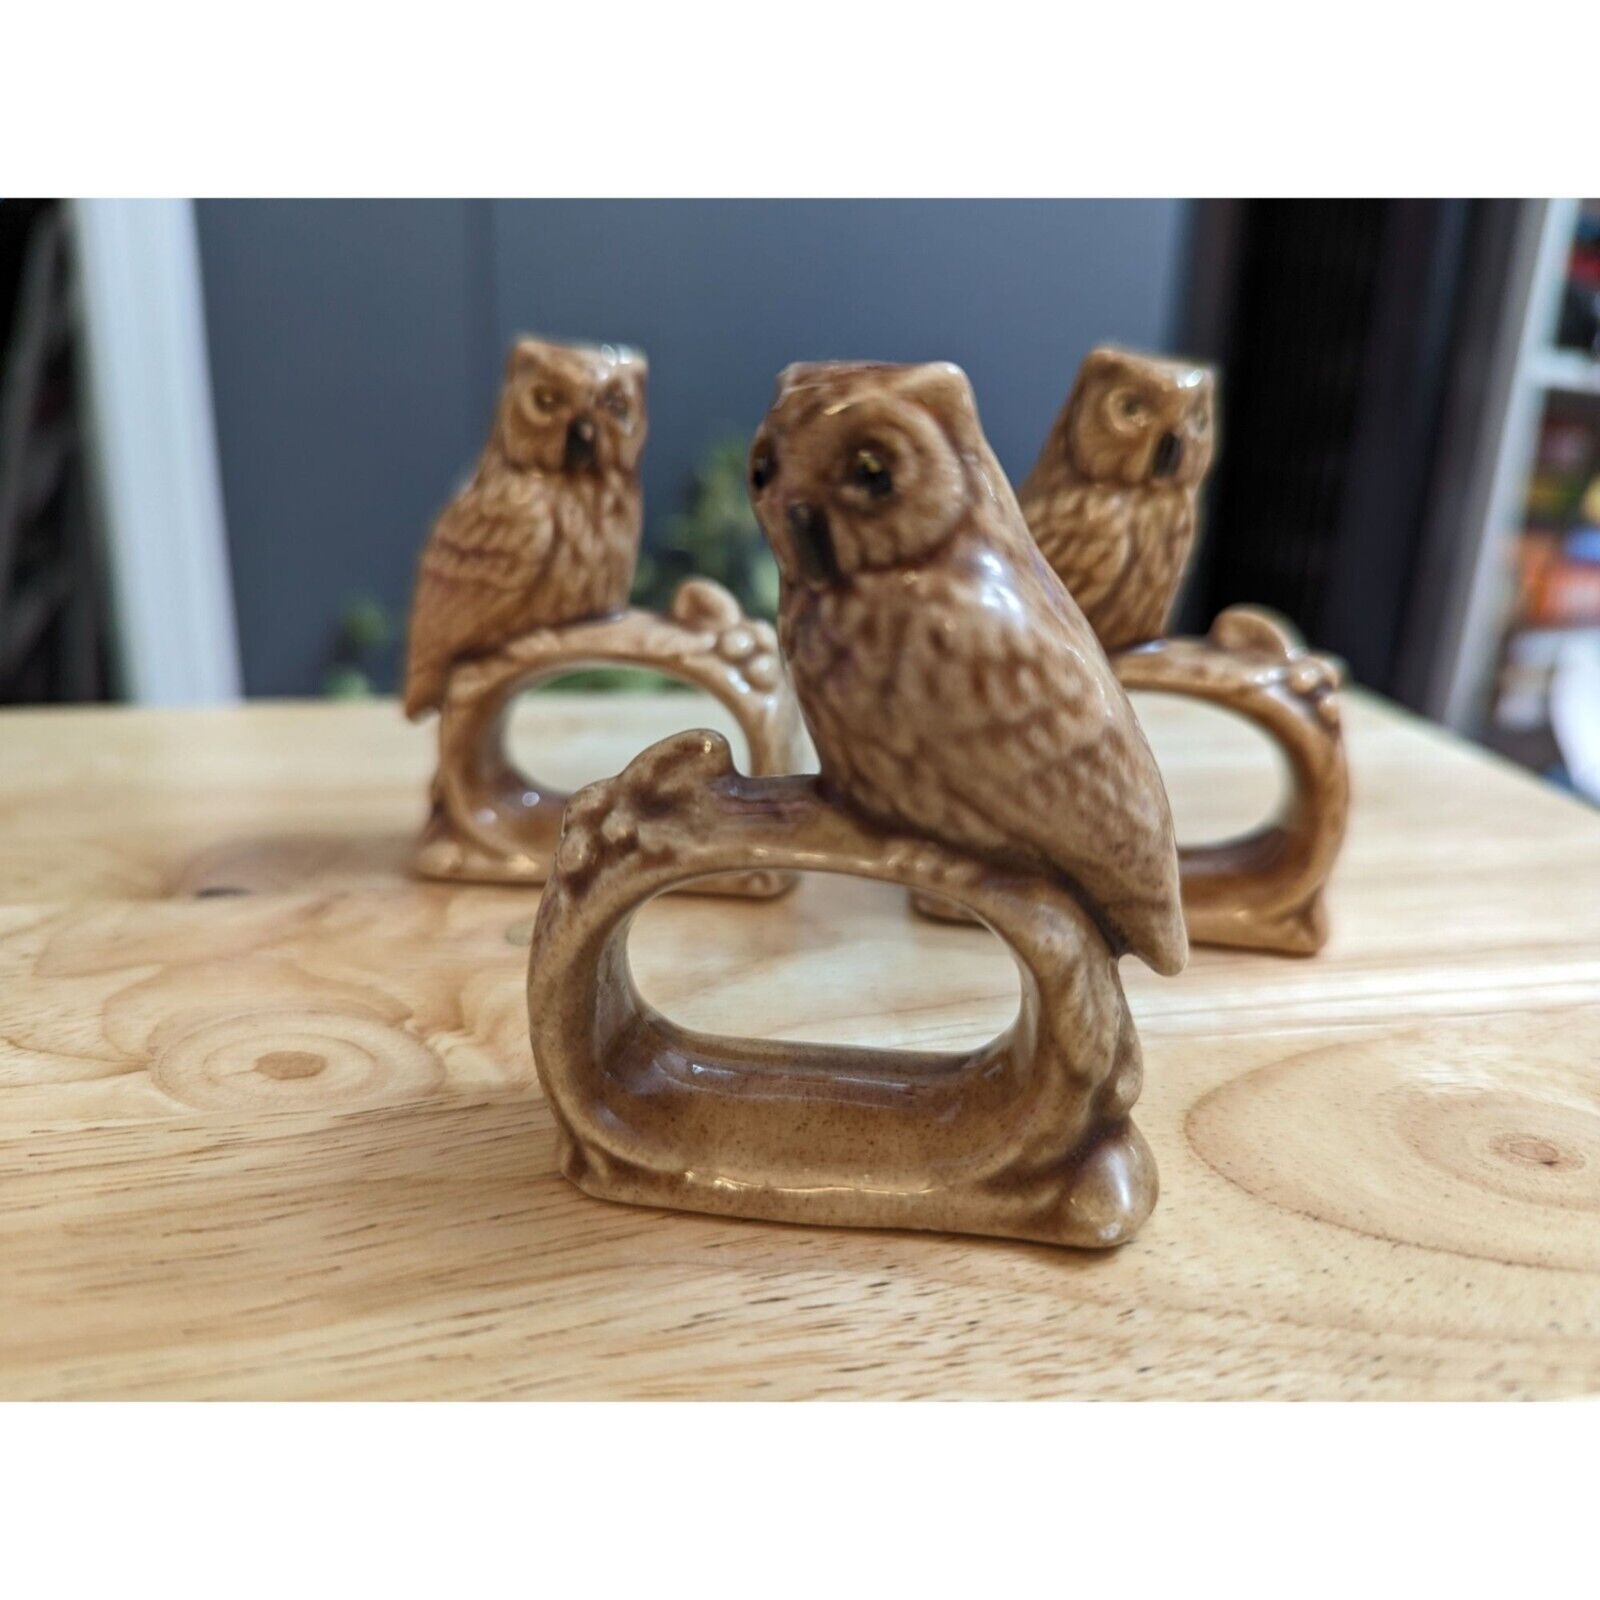 Lot 3 Brown Tan handpainted hobby piece owl on a branch napkin holder signed MRS